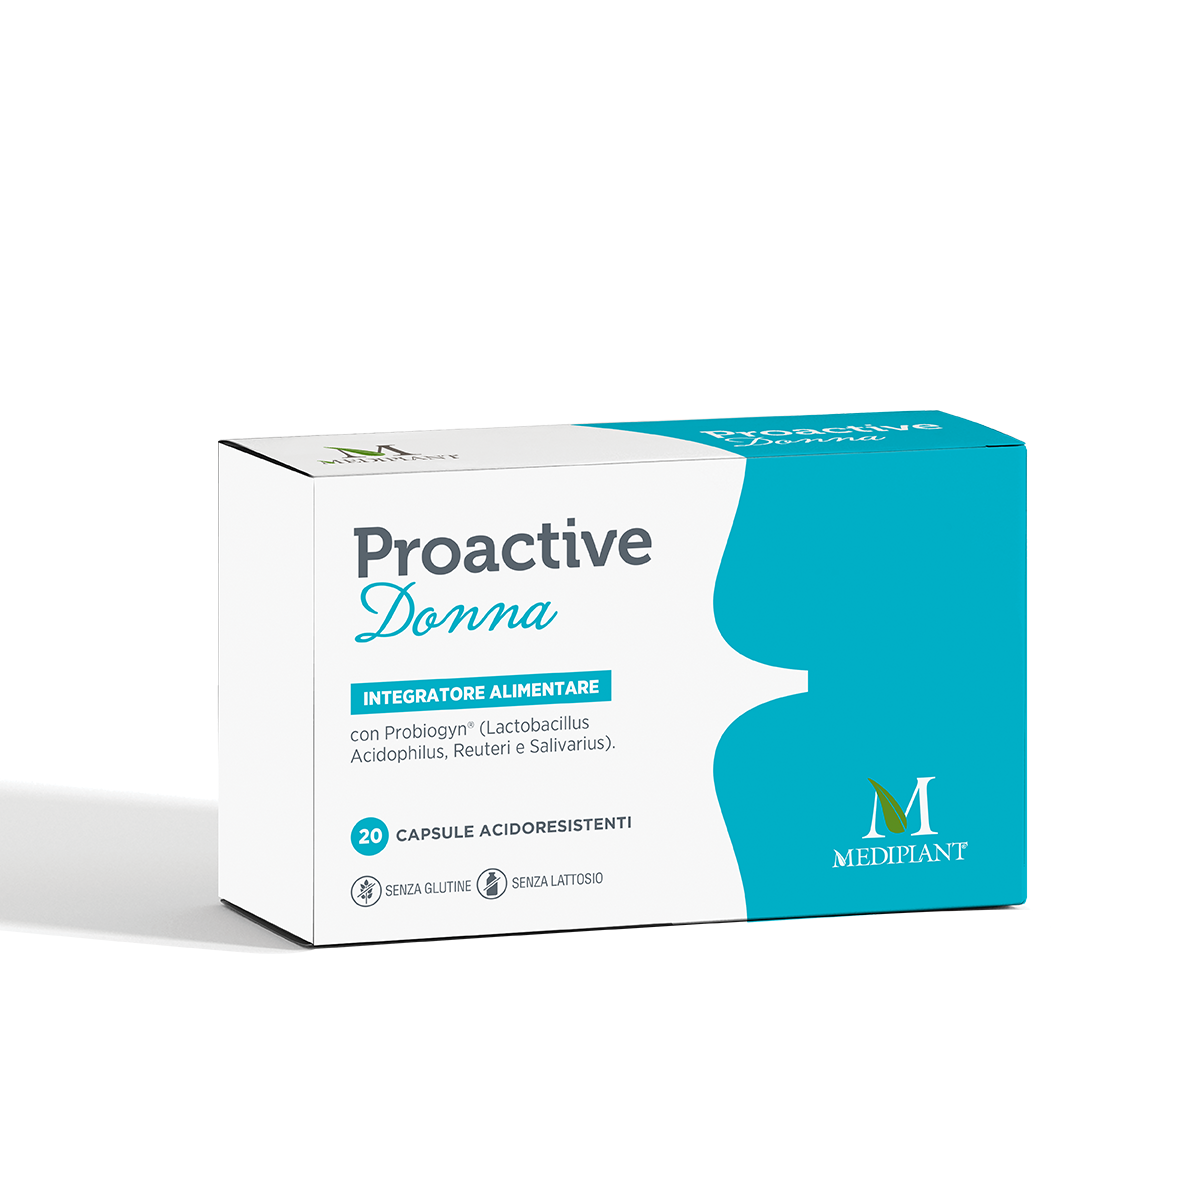 Image of Proactive Donna Mediplant 20 Capsule